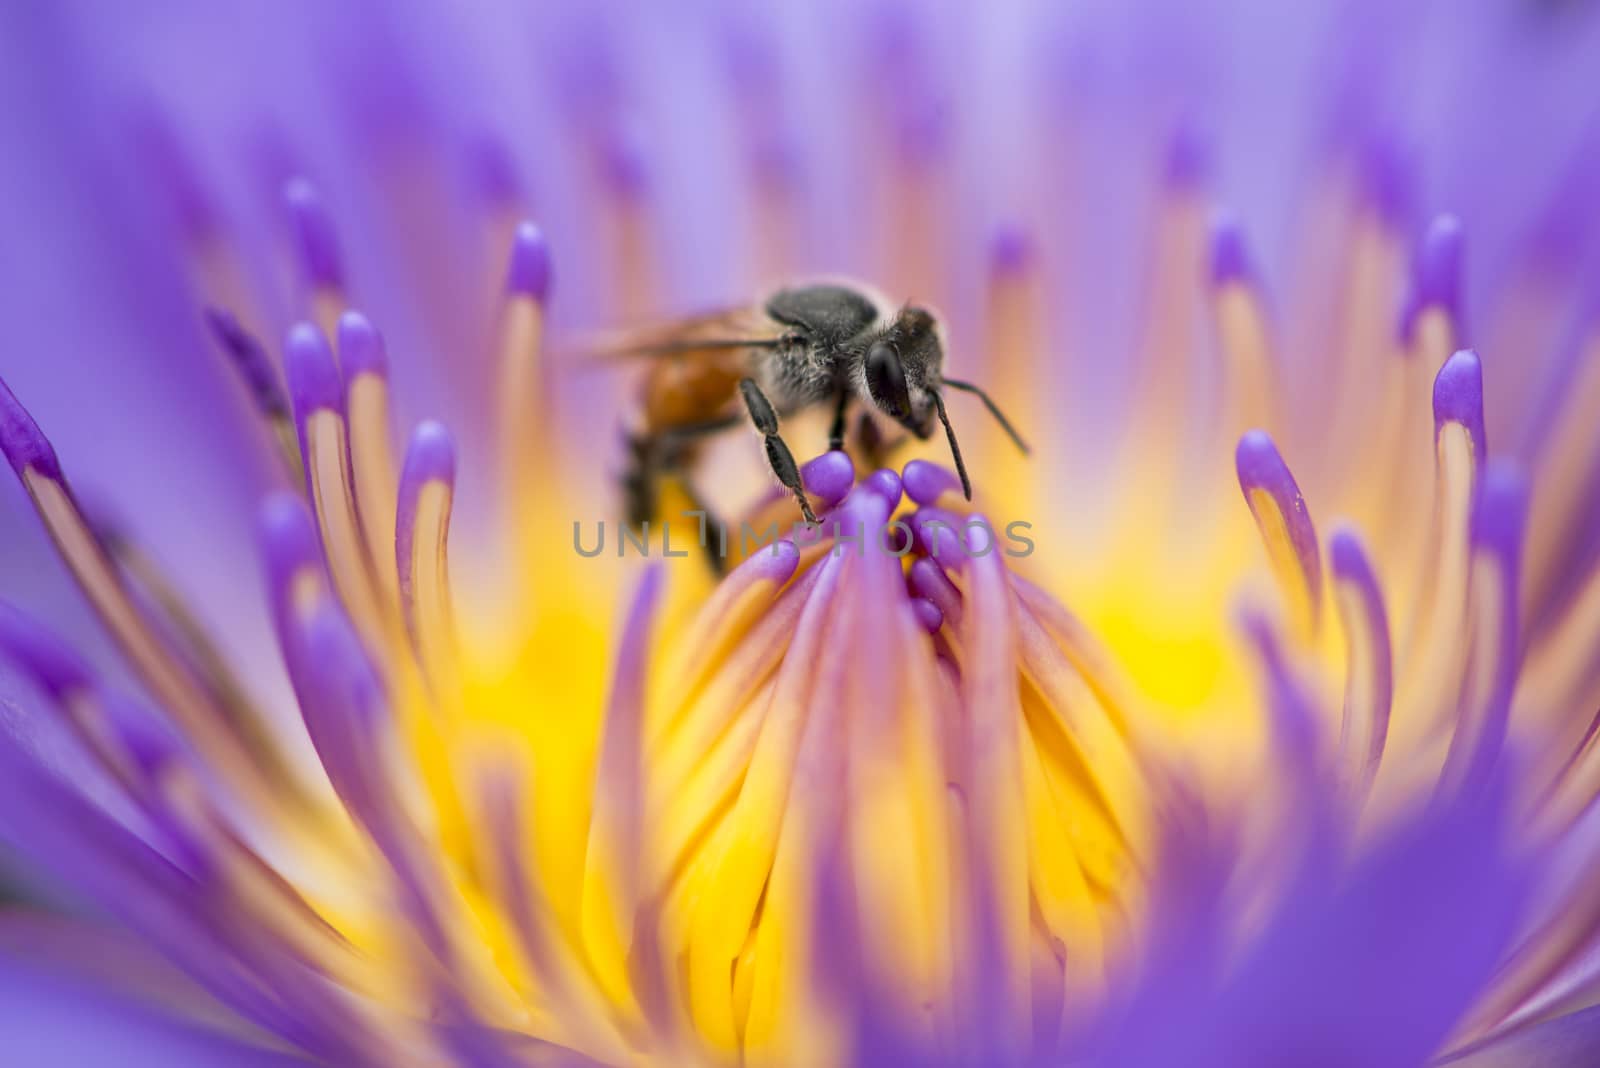 Closeup bee looking for honey from flower lotus purple and yello by sakchaineung